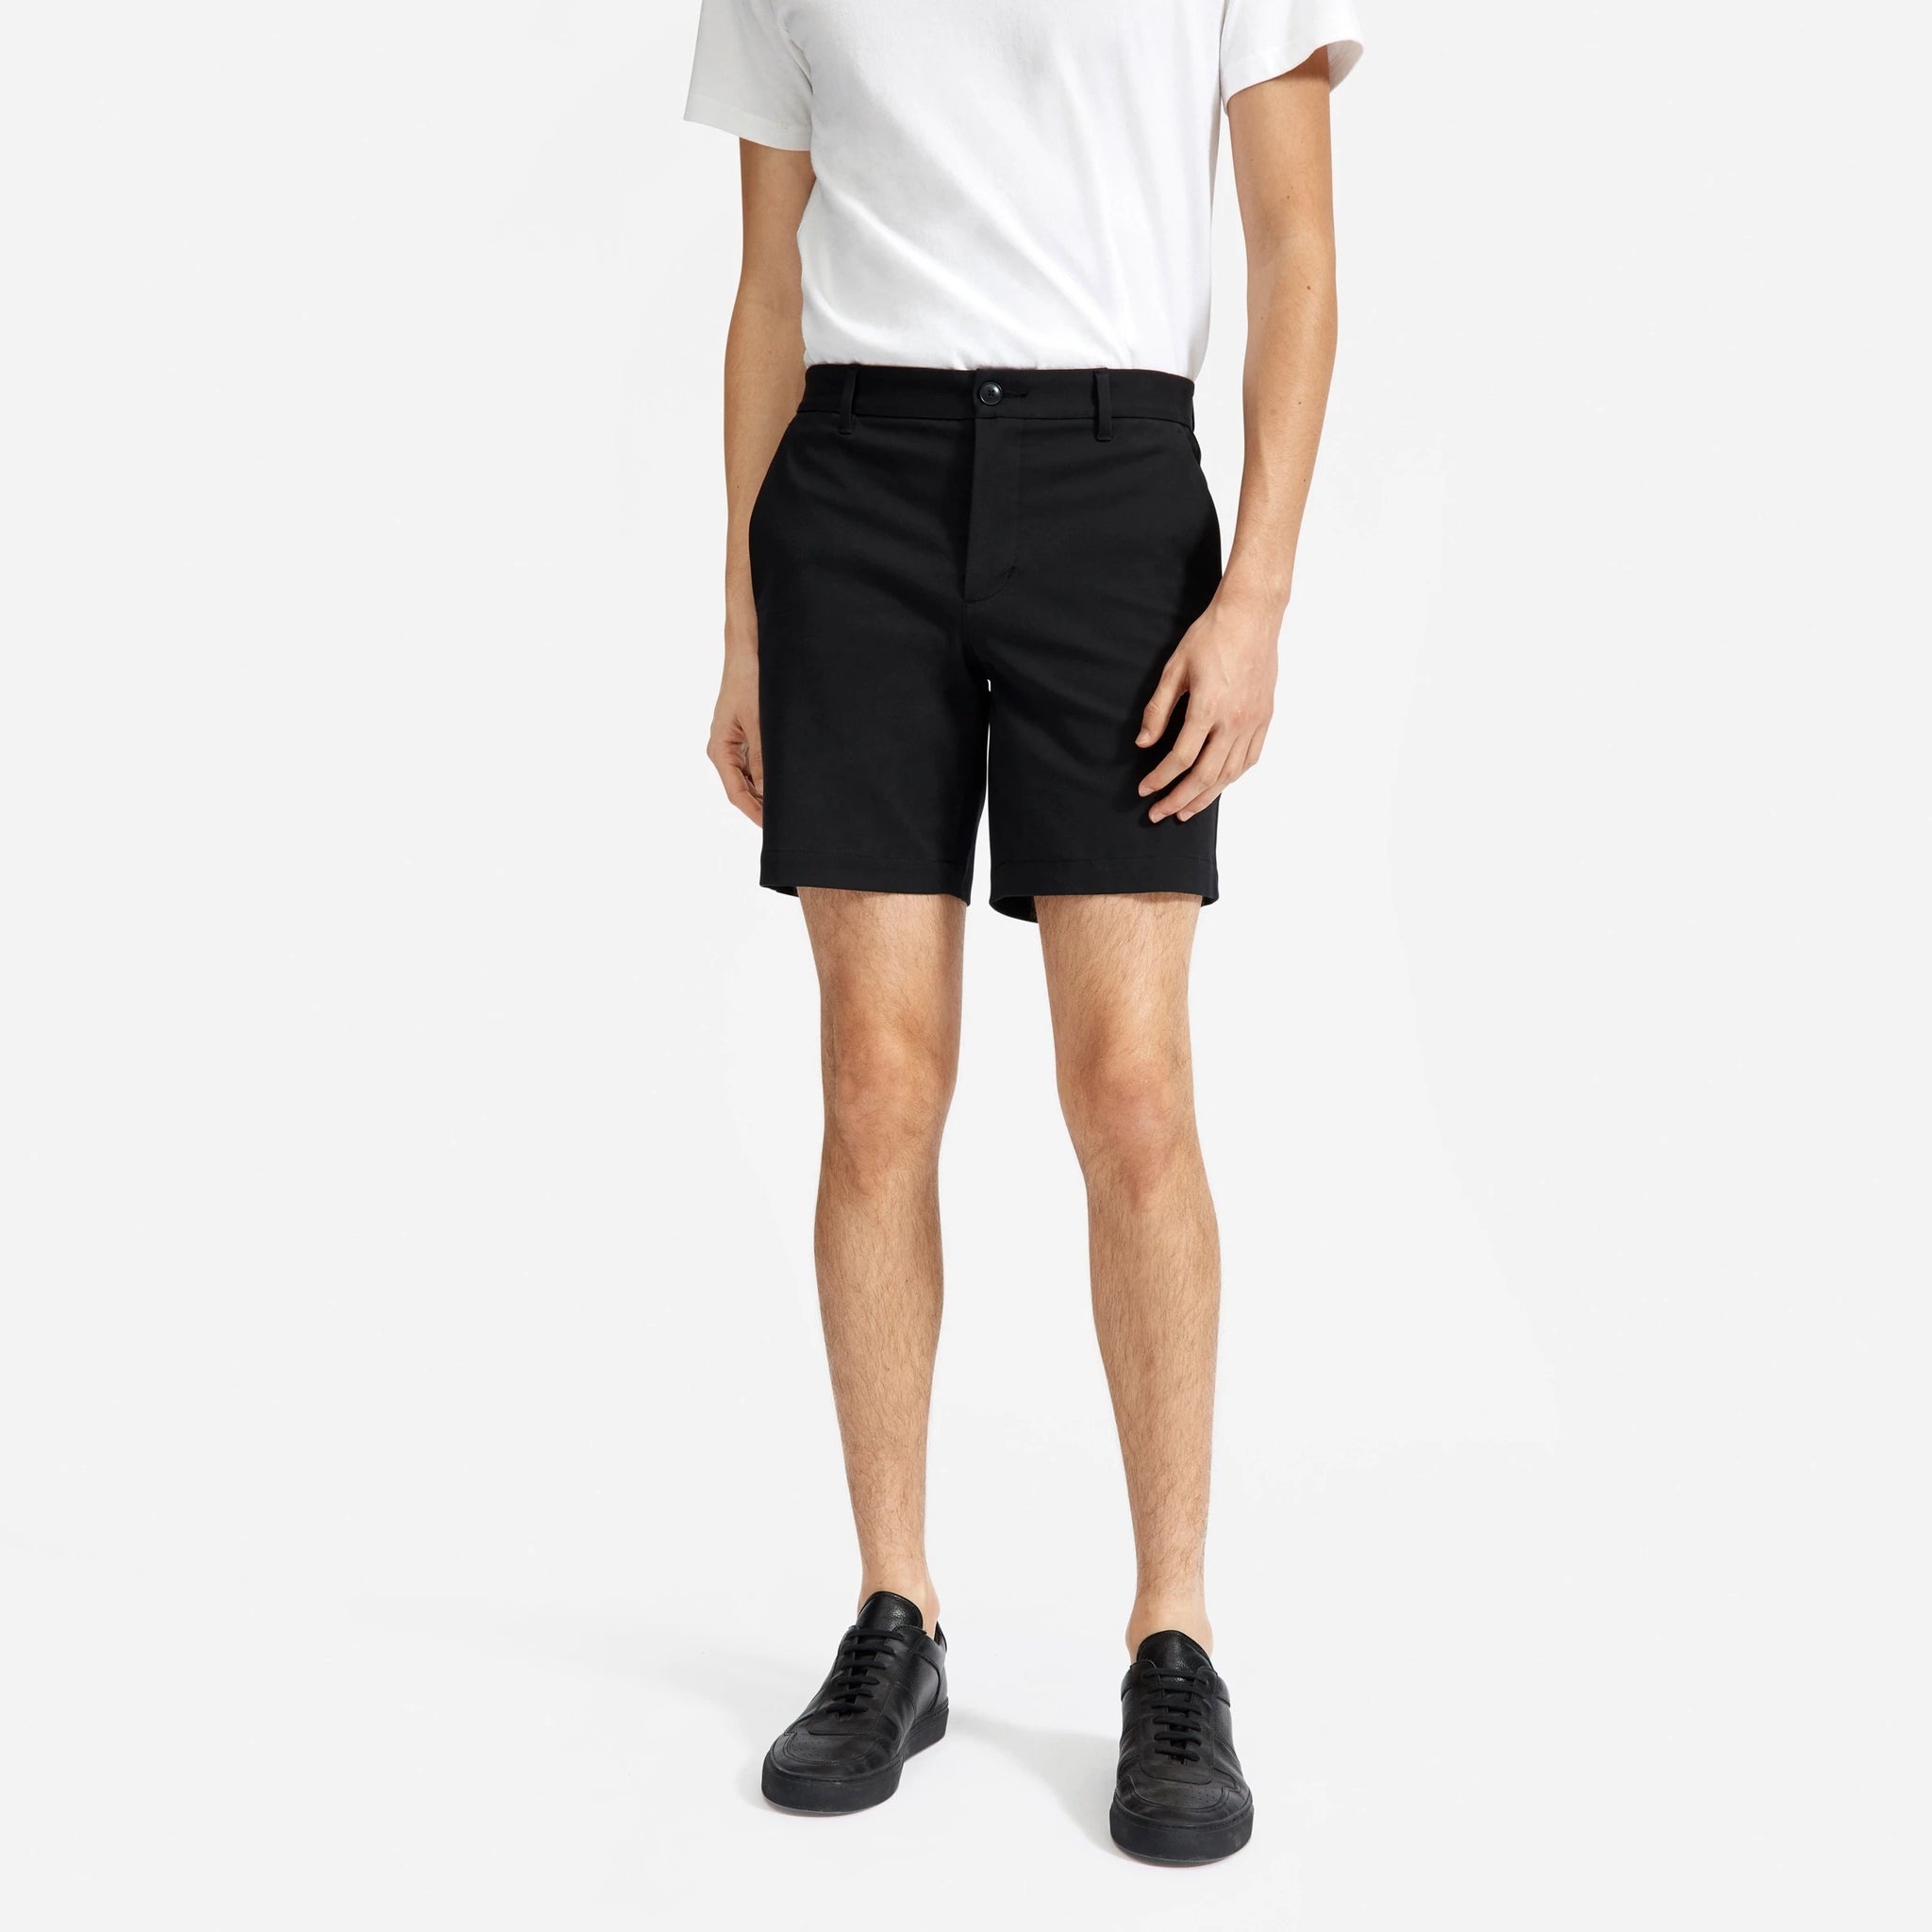 The Best Men’s Shorts for Showing Off a Little Leg This Summer